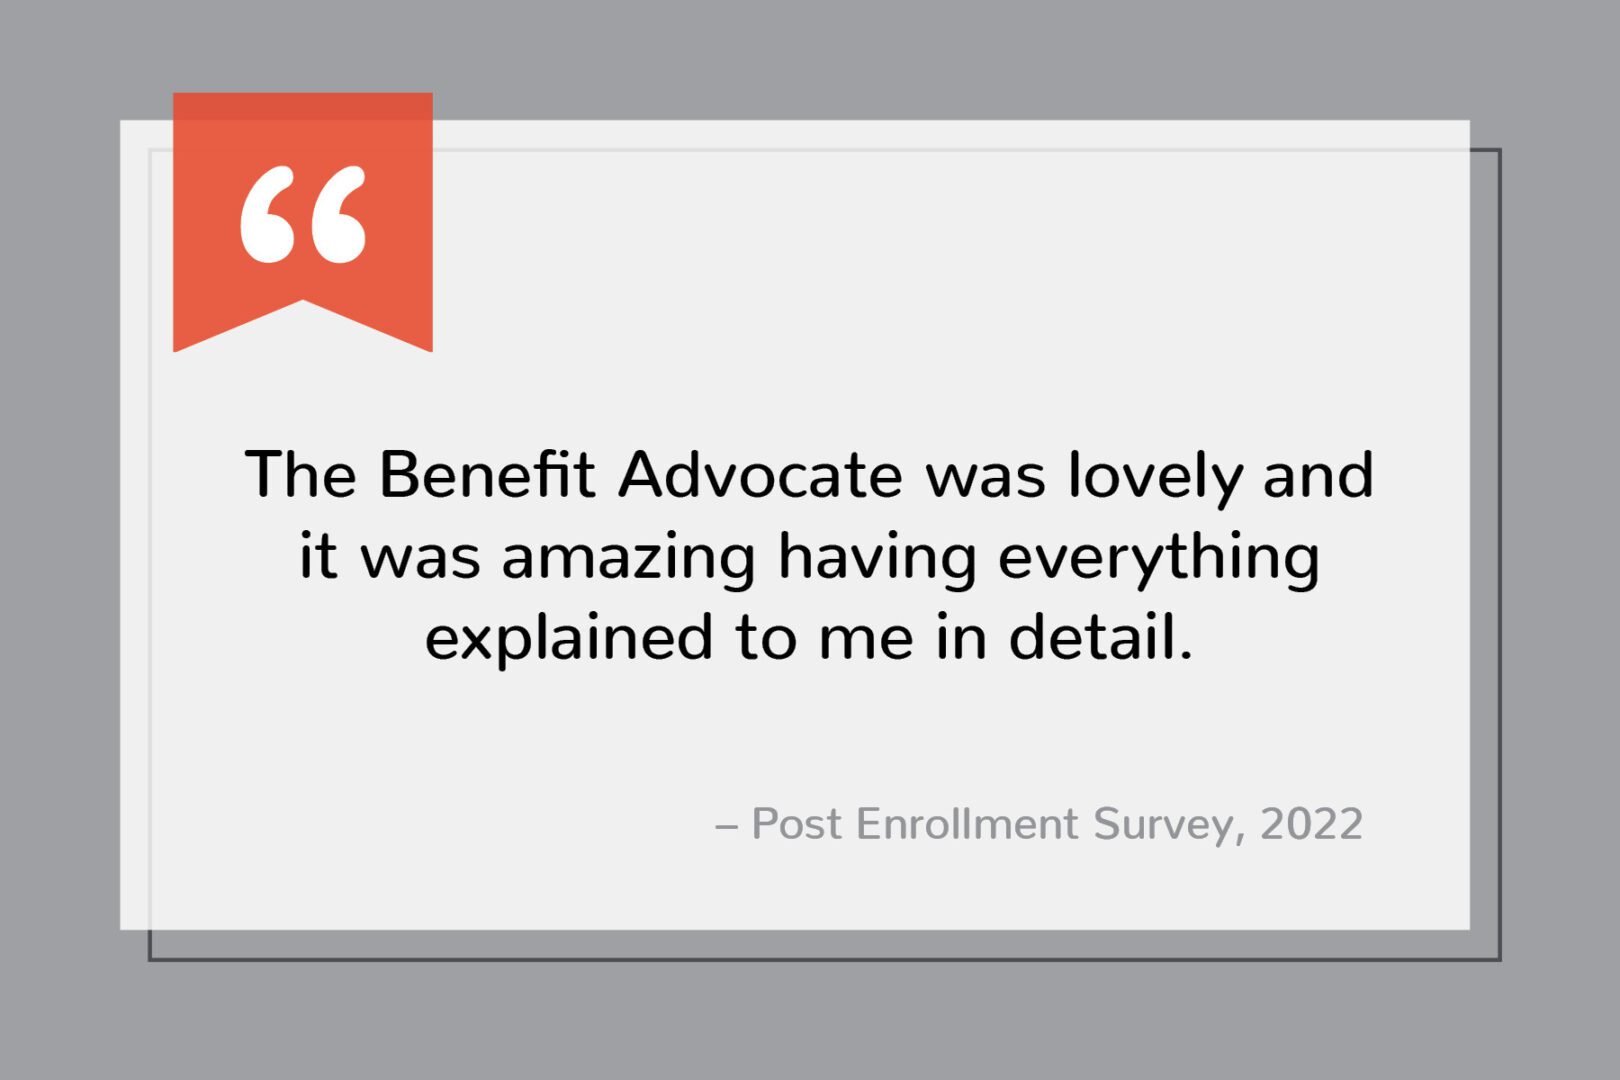 A quote from the benefit advocate